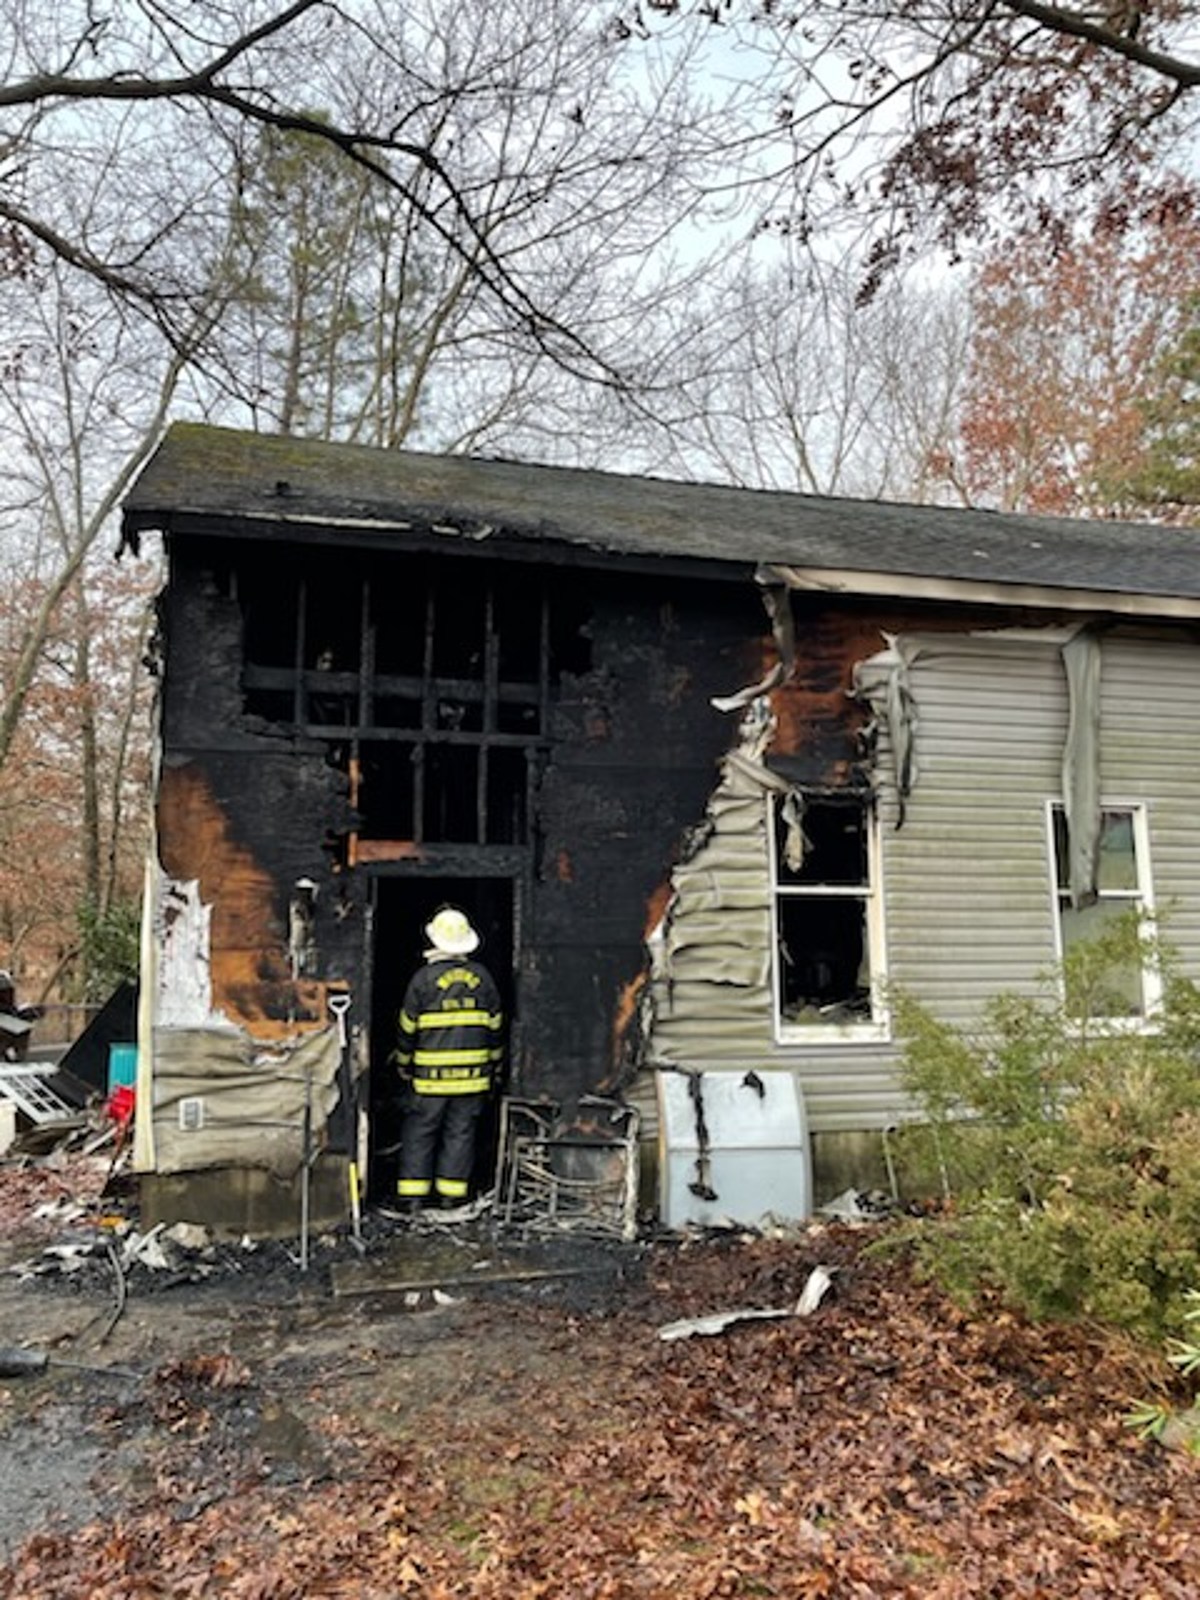 Fire that destroyed part of a Whiting home is under investigation